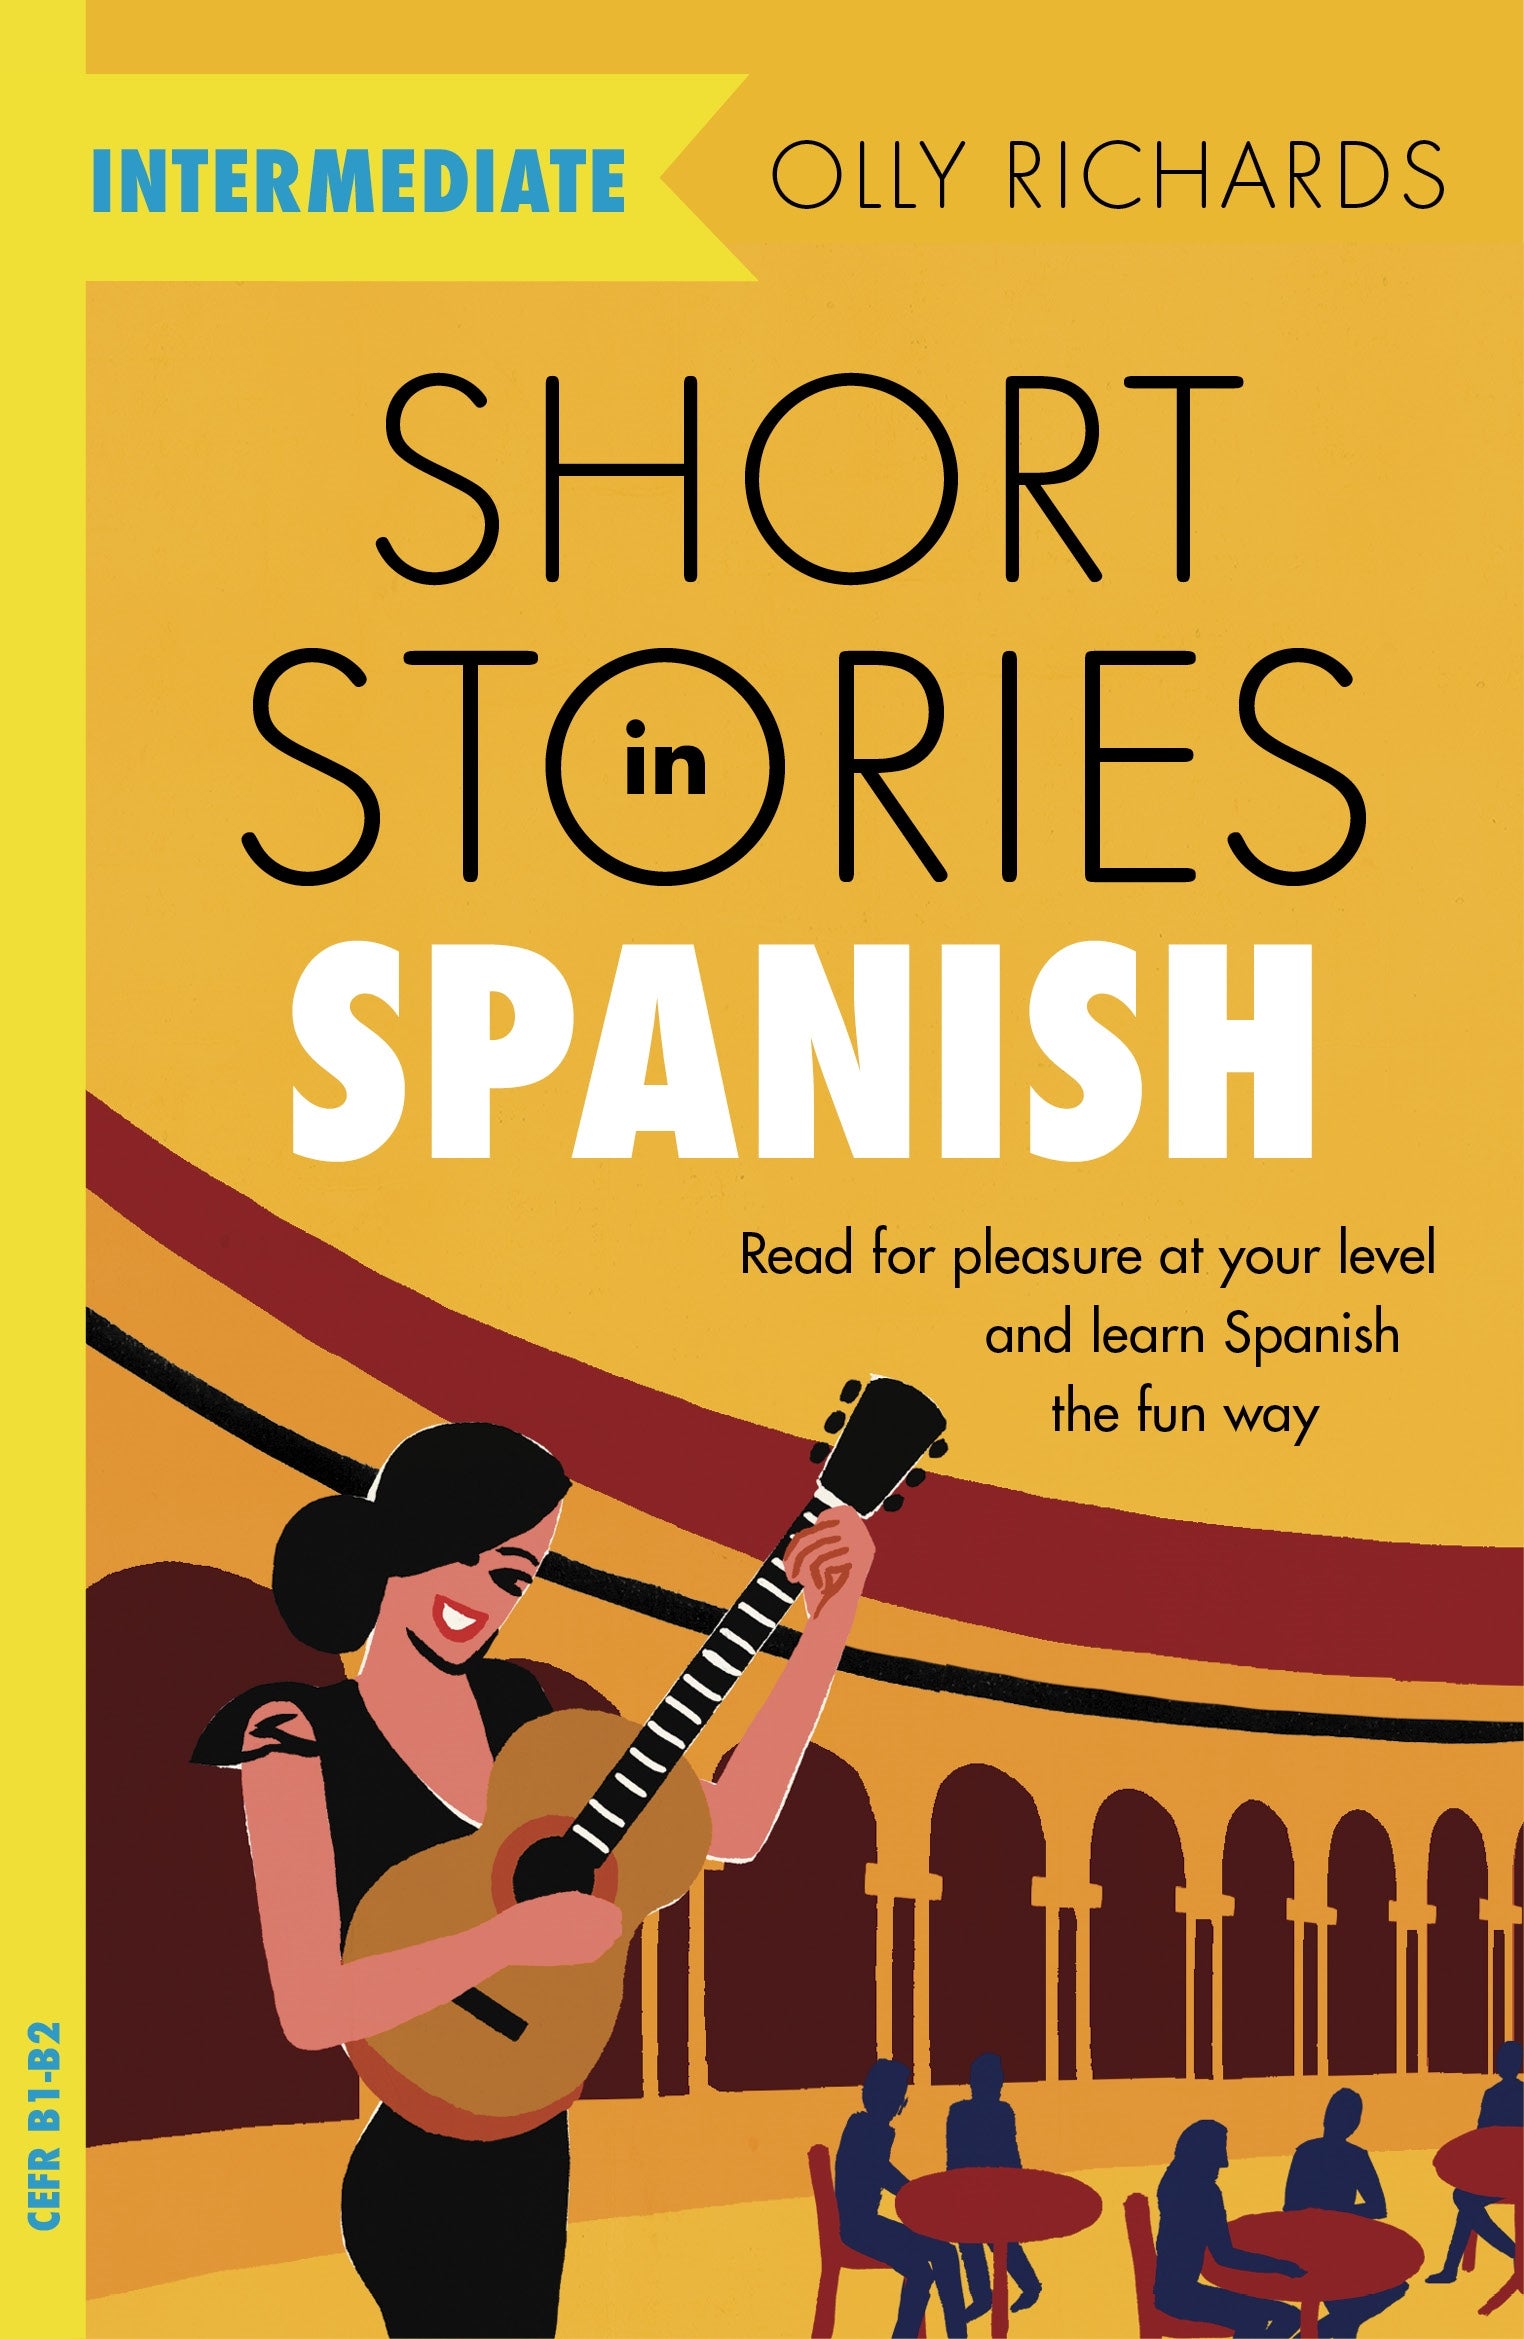 Short Stories in Spanish  for Intermediate Learners by Olly Richards